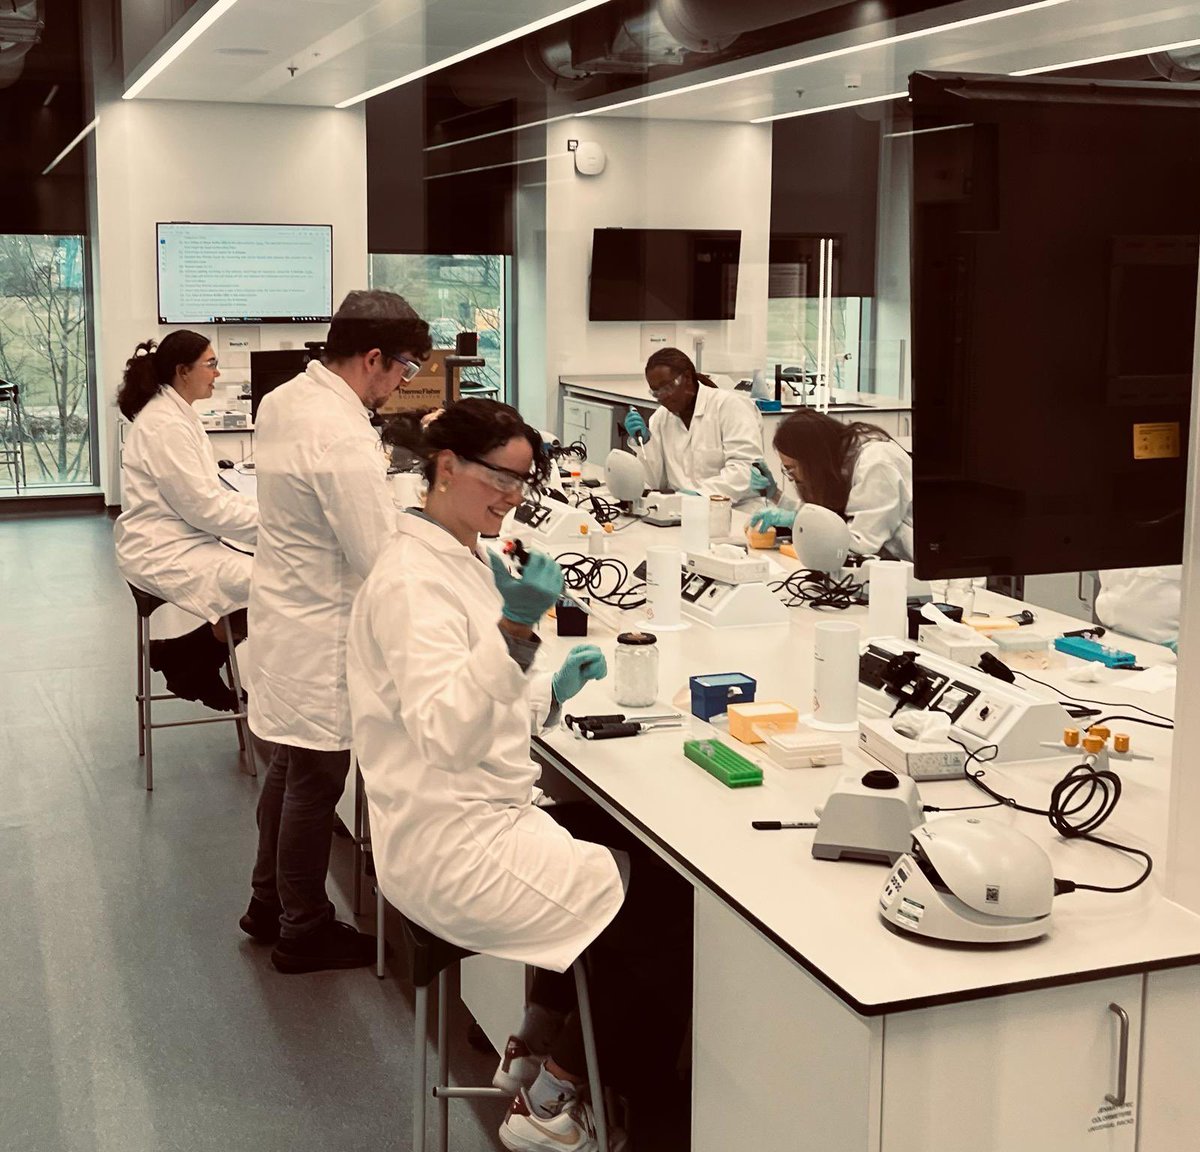 Our Ancient Biomolecules MSc class learning how to extract DNA in the University’s new science teaching hub @UoAGeosciences @aberdeenuni